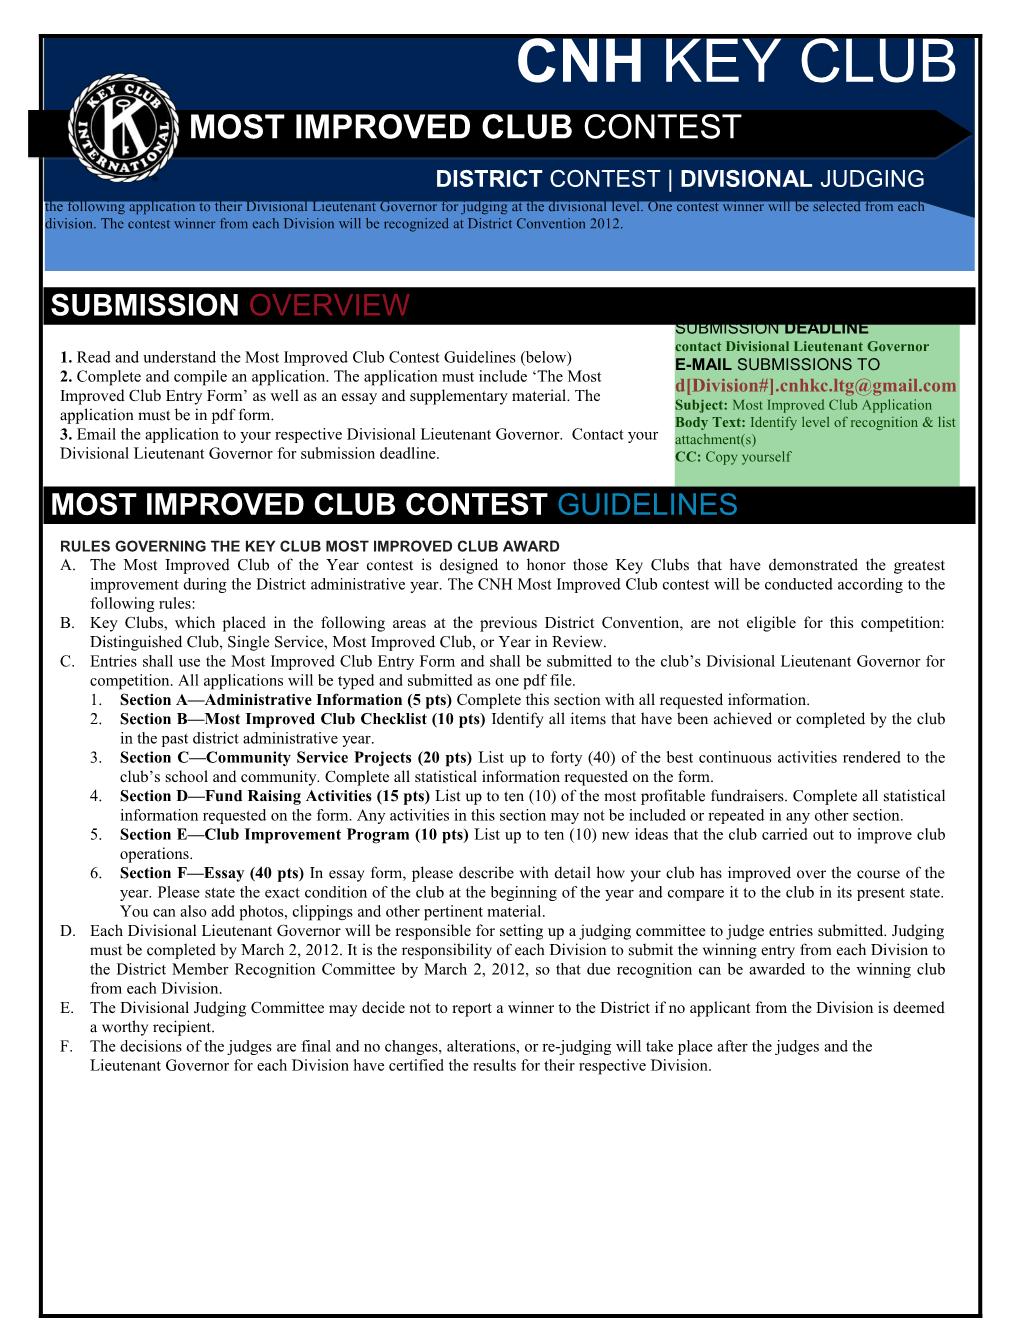 1. Read and Understand the Most Improved Club Contest Guidelines (Below)